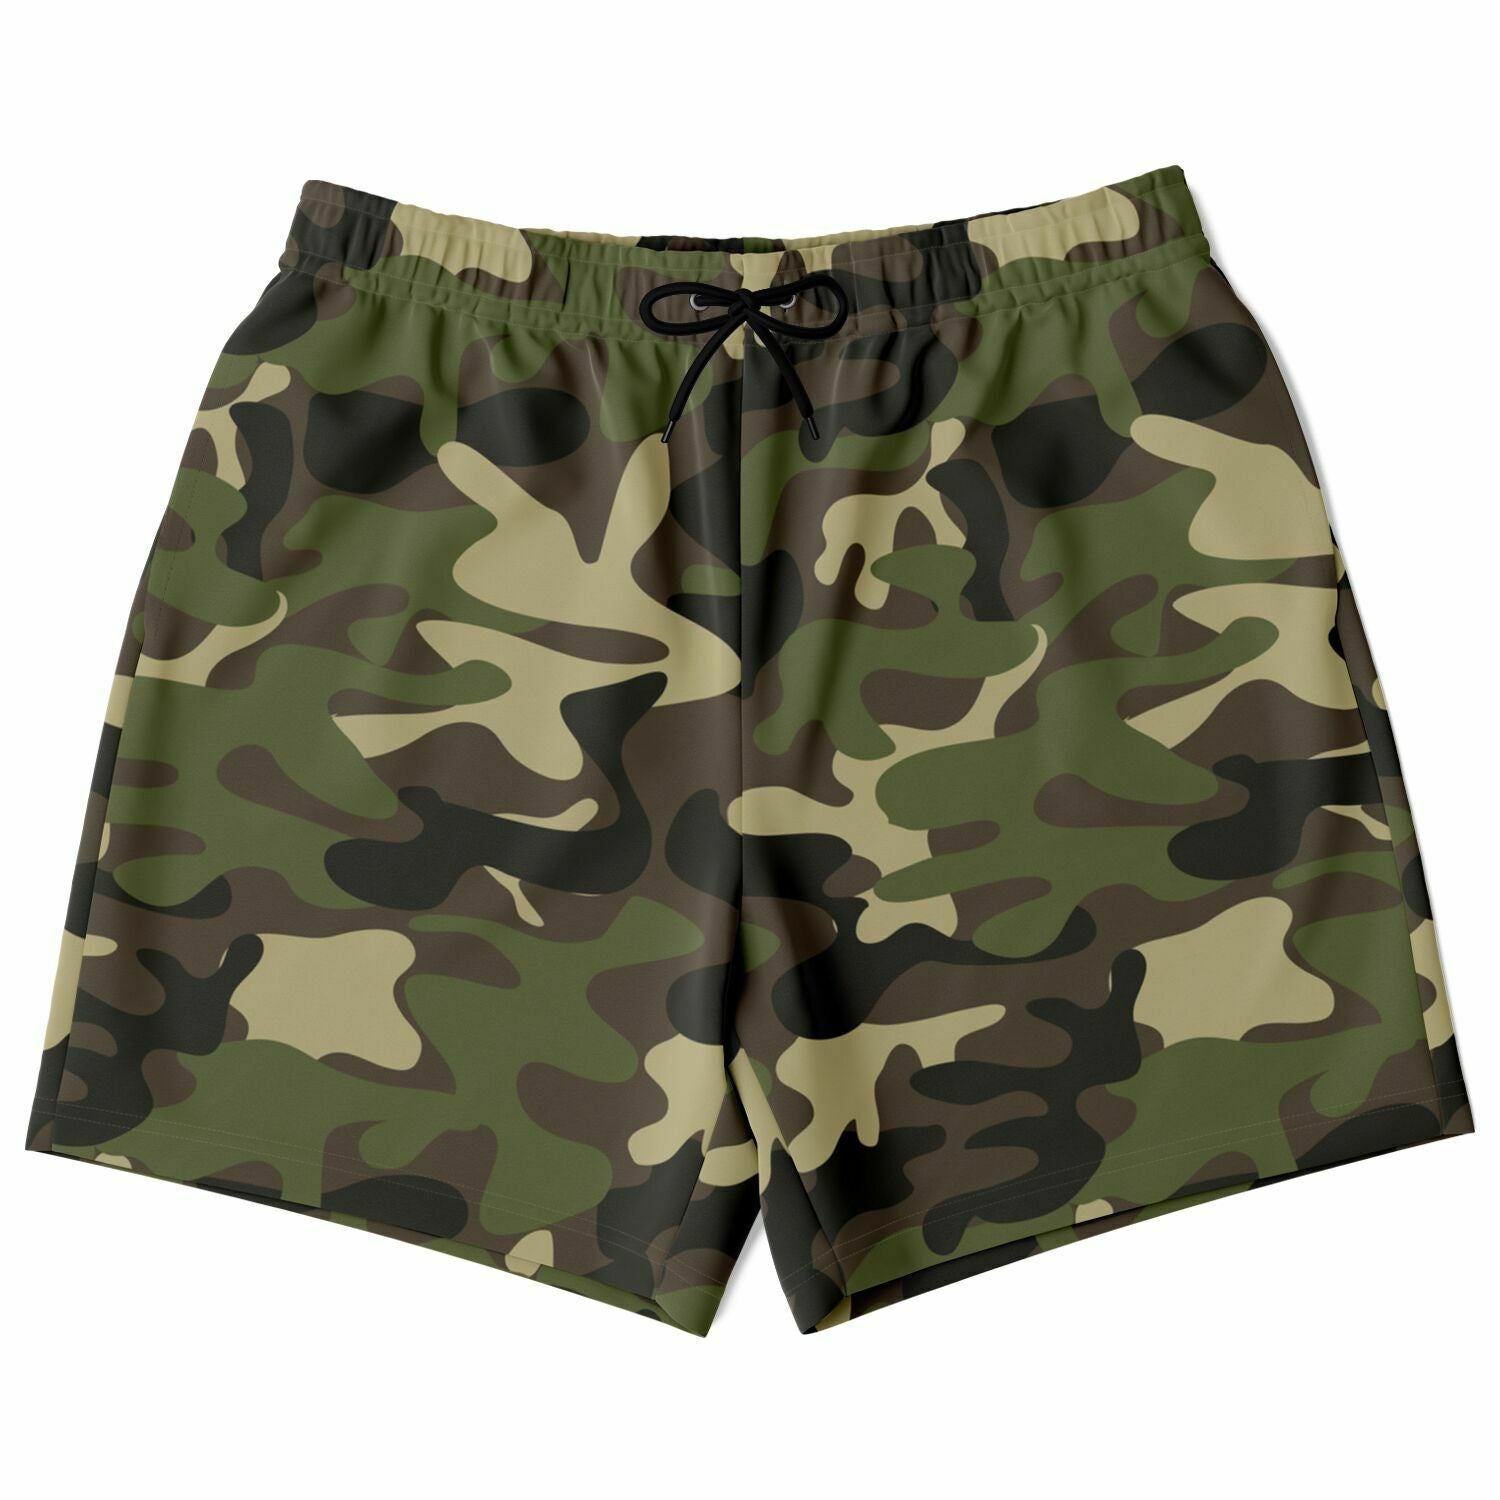 Camo Men Shorts, Camouflage Green Army Beach Mid Length 7 Inch